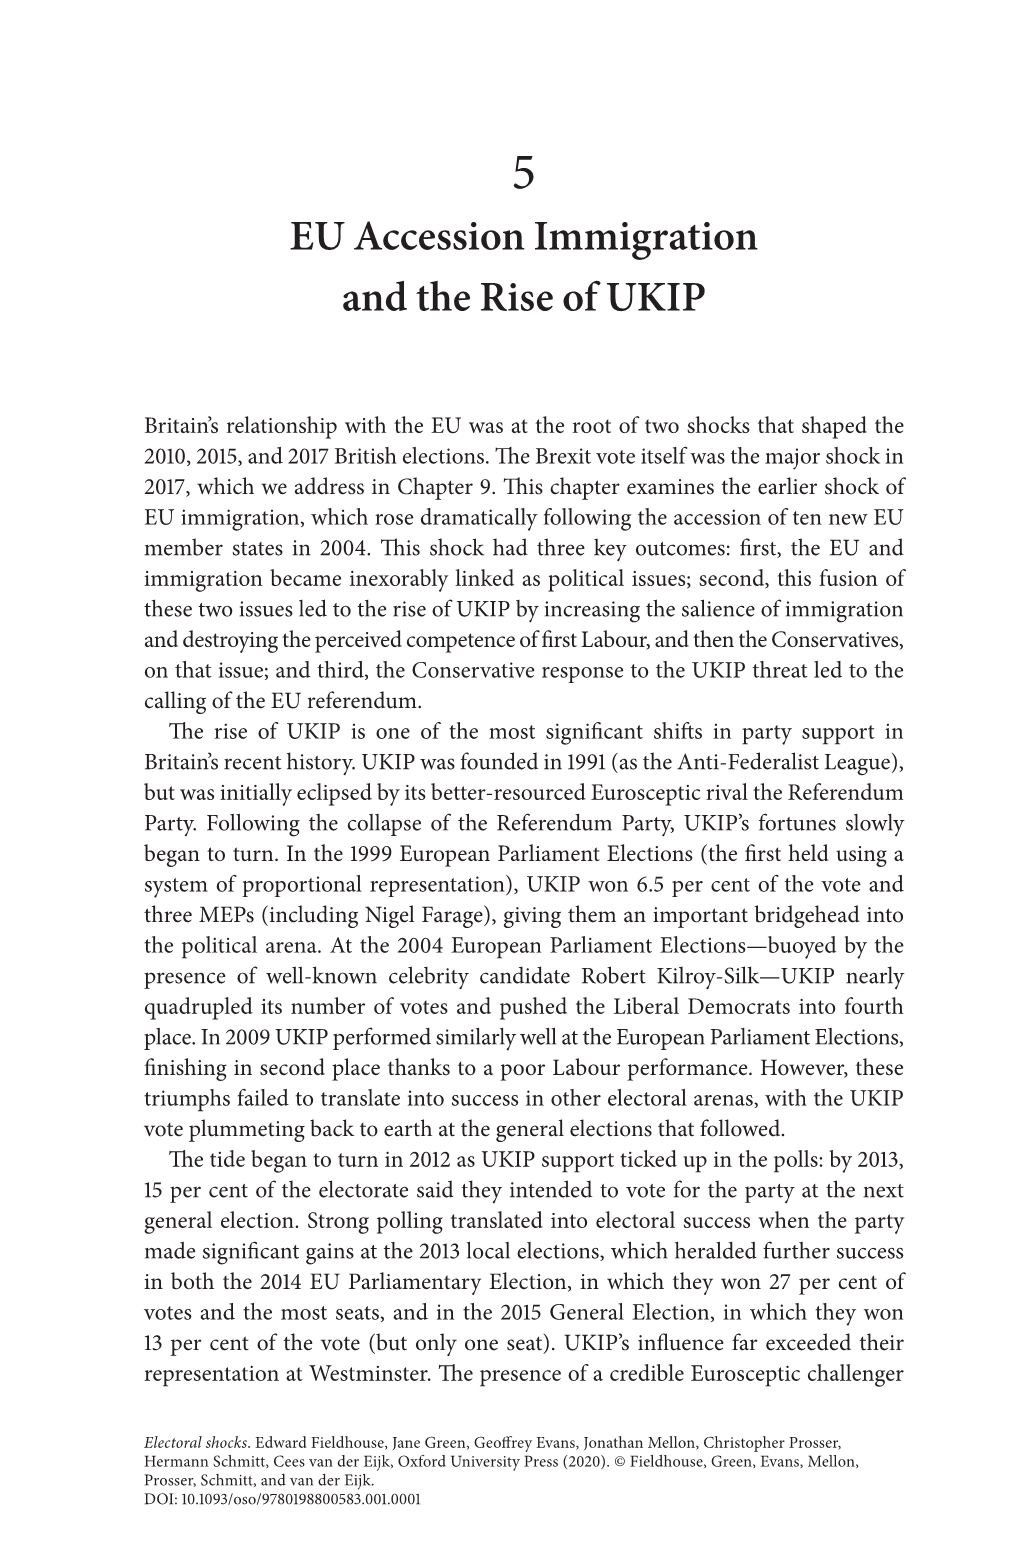 EU Accession Immigration and the Rise of UKIP